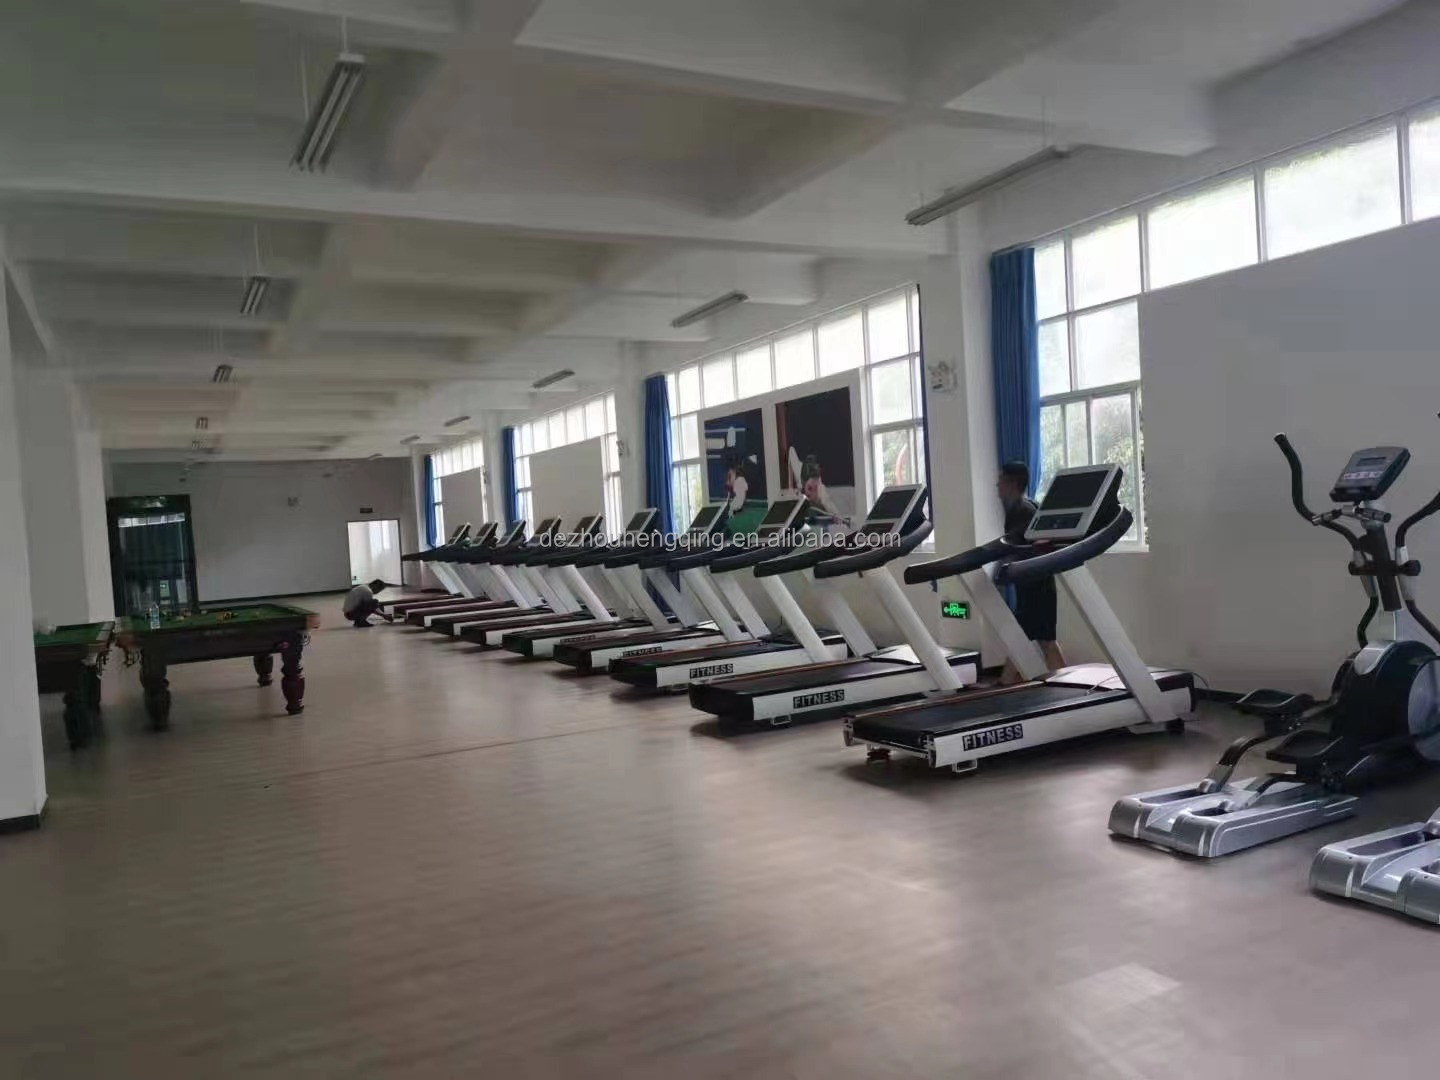 Factory Direct Workout Fitness Running Machine Home Gym Treadmill Sports Equipments